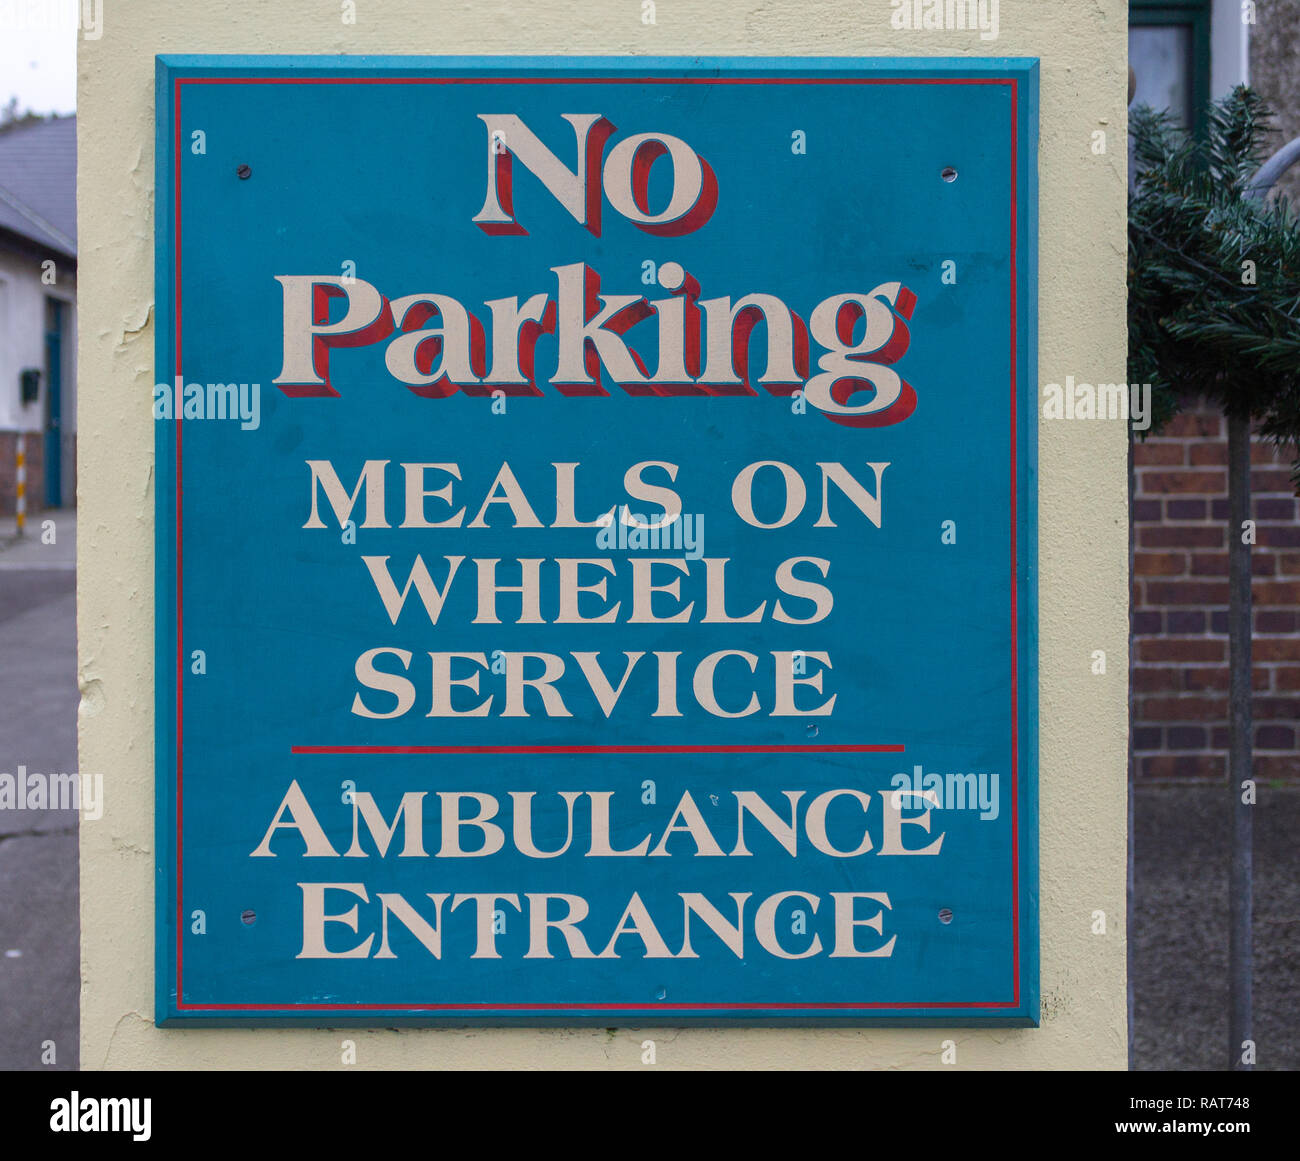 parking restriction sign for meals on wheels service. Stock Photo